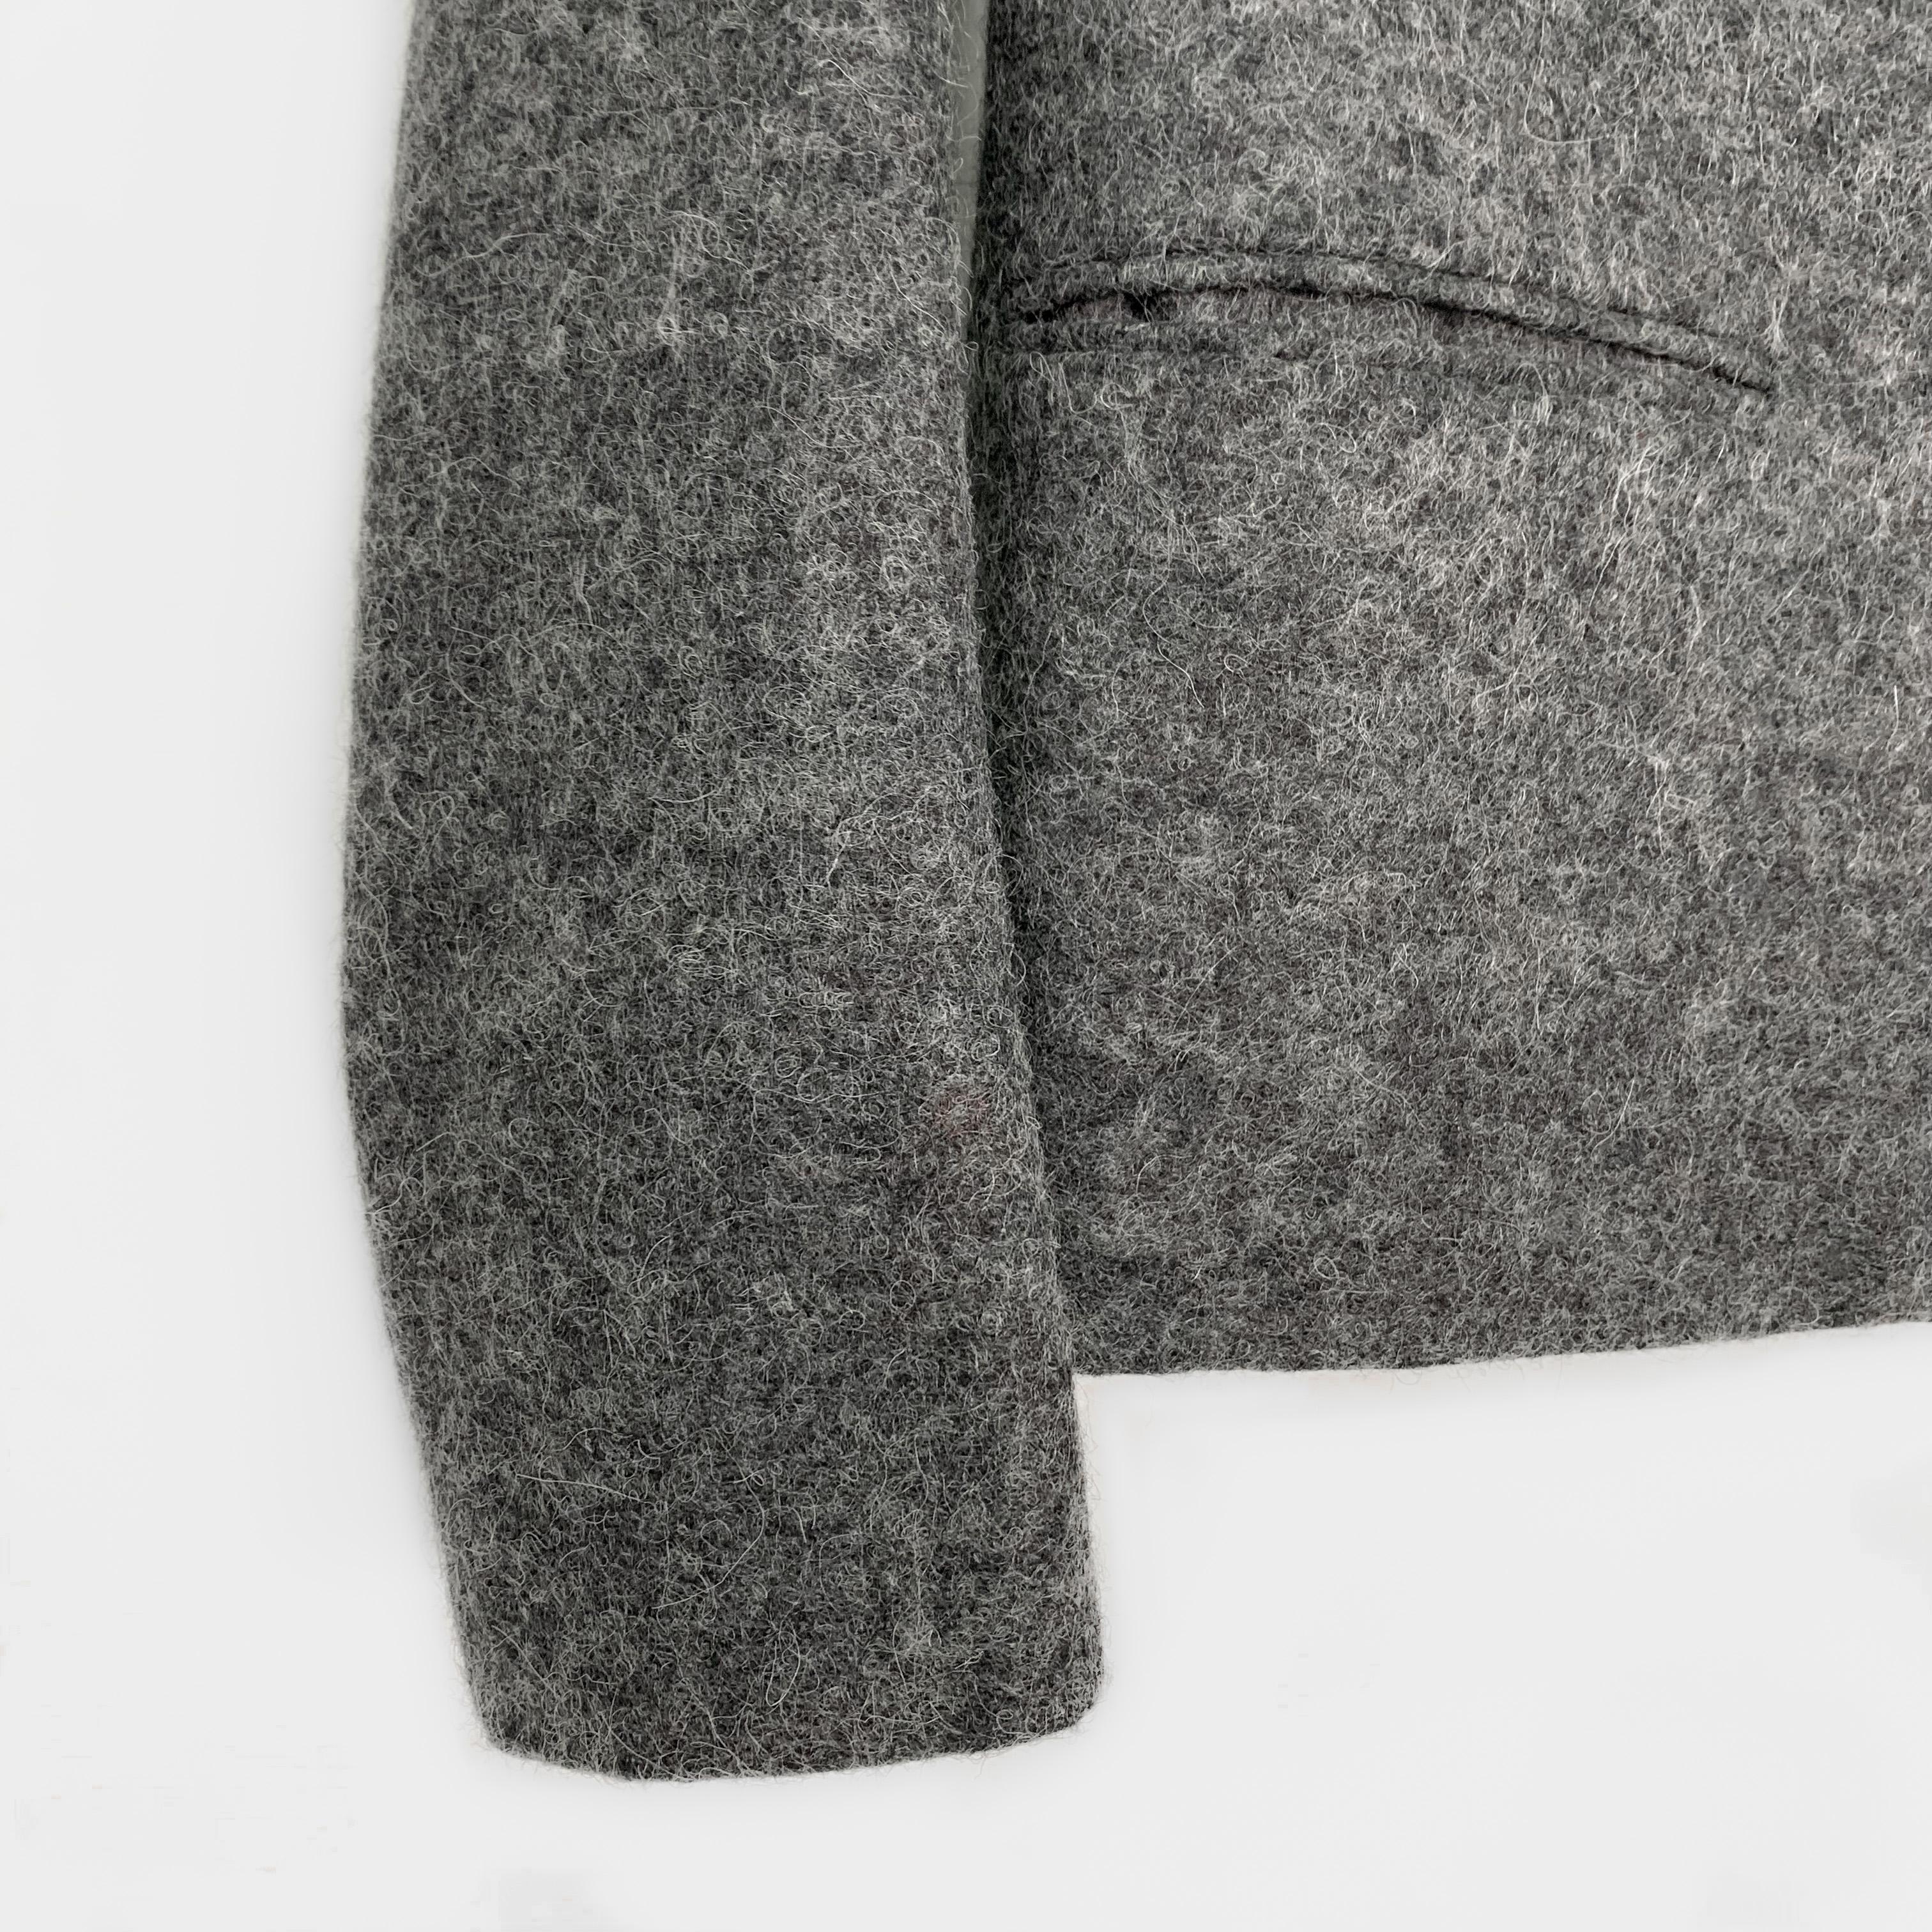 AW 2010 mr. Margiela's last RTW collection grey wool deconstructed blazer For Sale 12